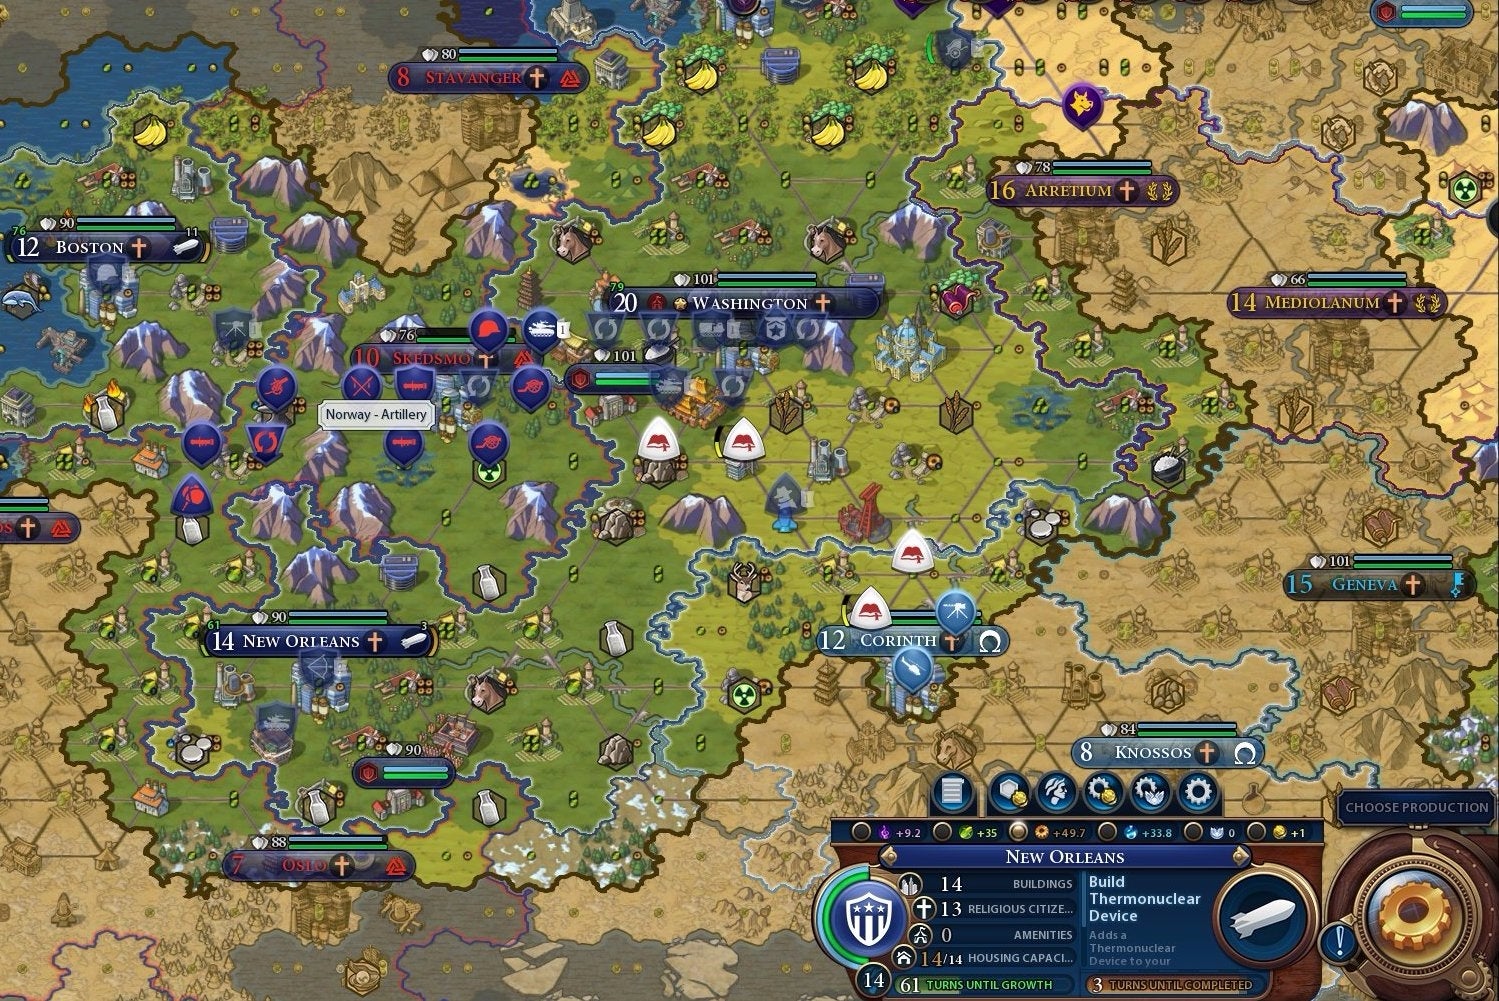 Image for Civilization 6 Domination Victory - war conditions, Casus Belli, and how to win the military victory